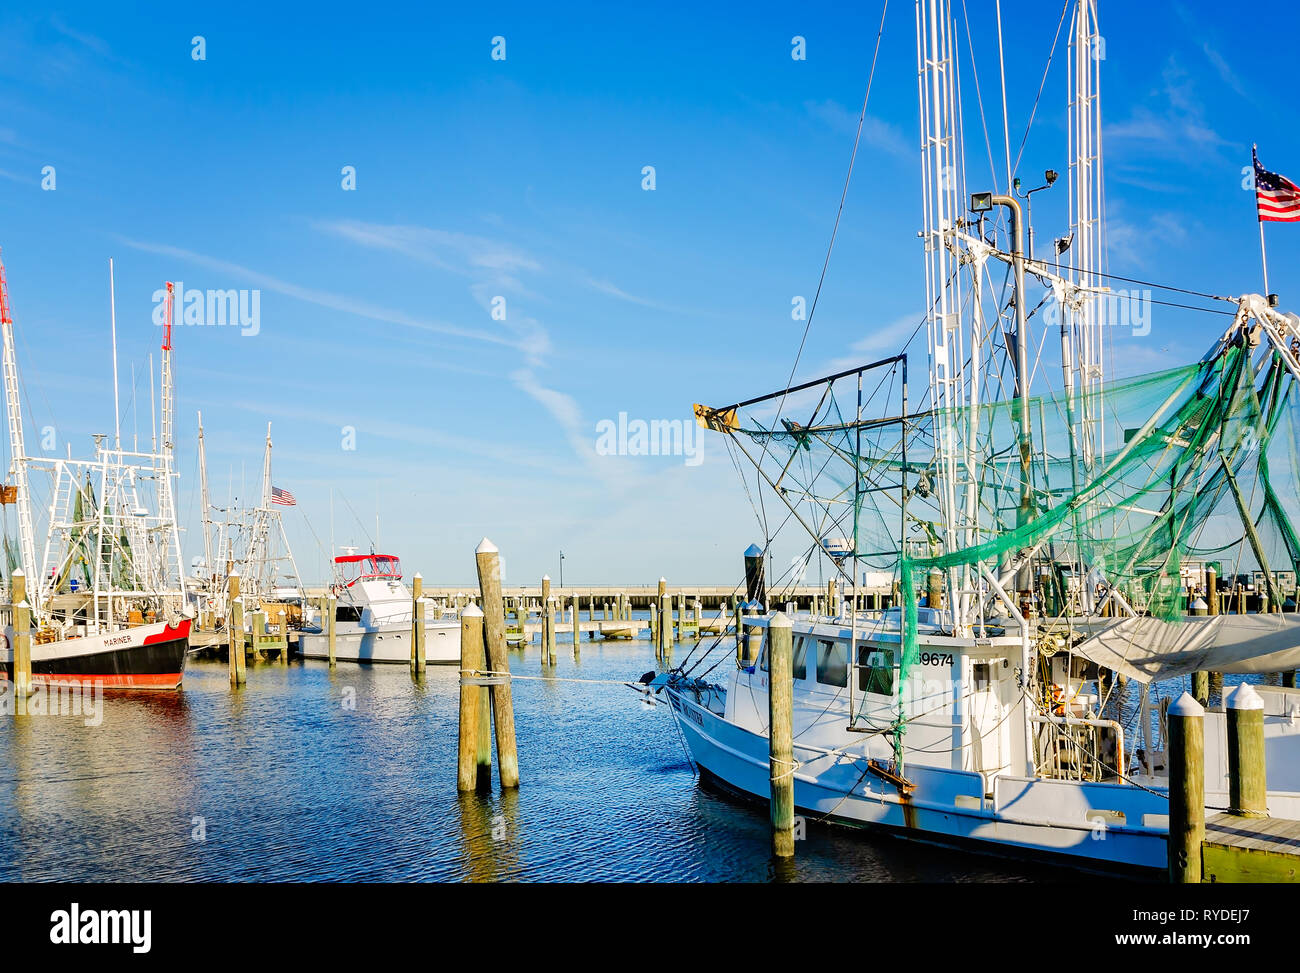 Shrimp boats are docked in Pass Christian Harbor, Feb. 24, 2019, in Pass Christian, Mississippi. Stock Photo